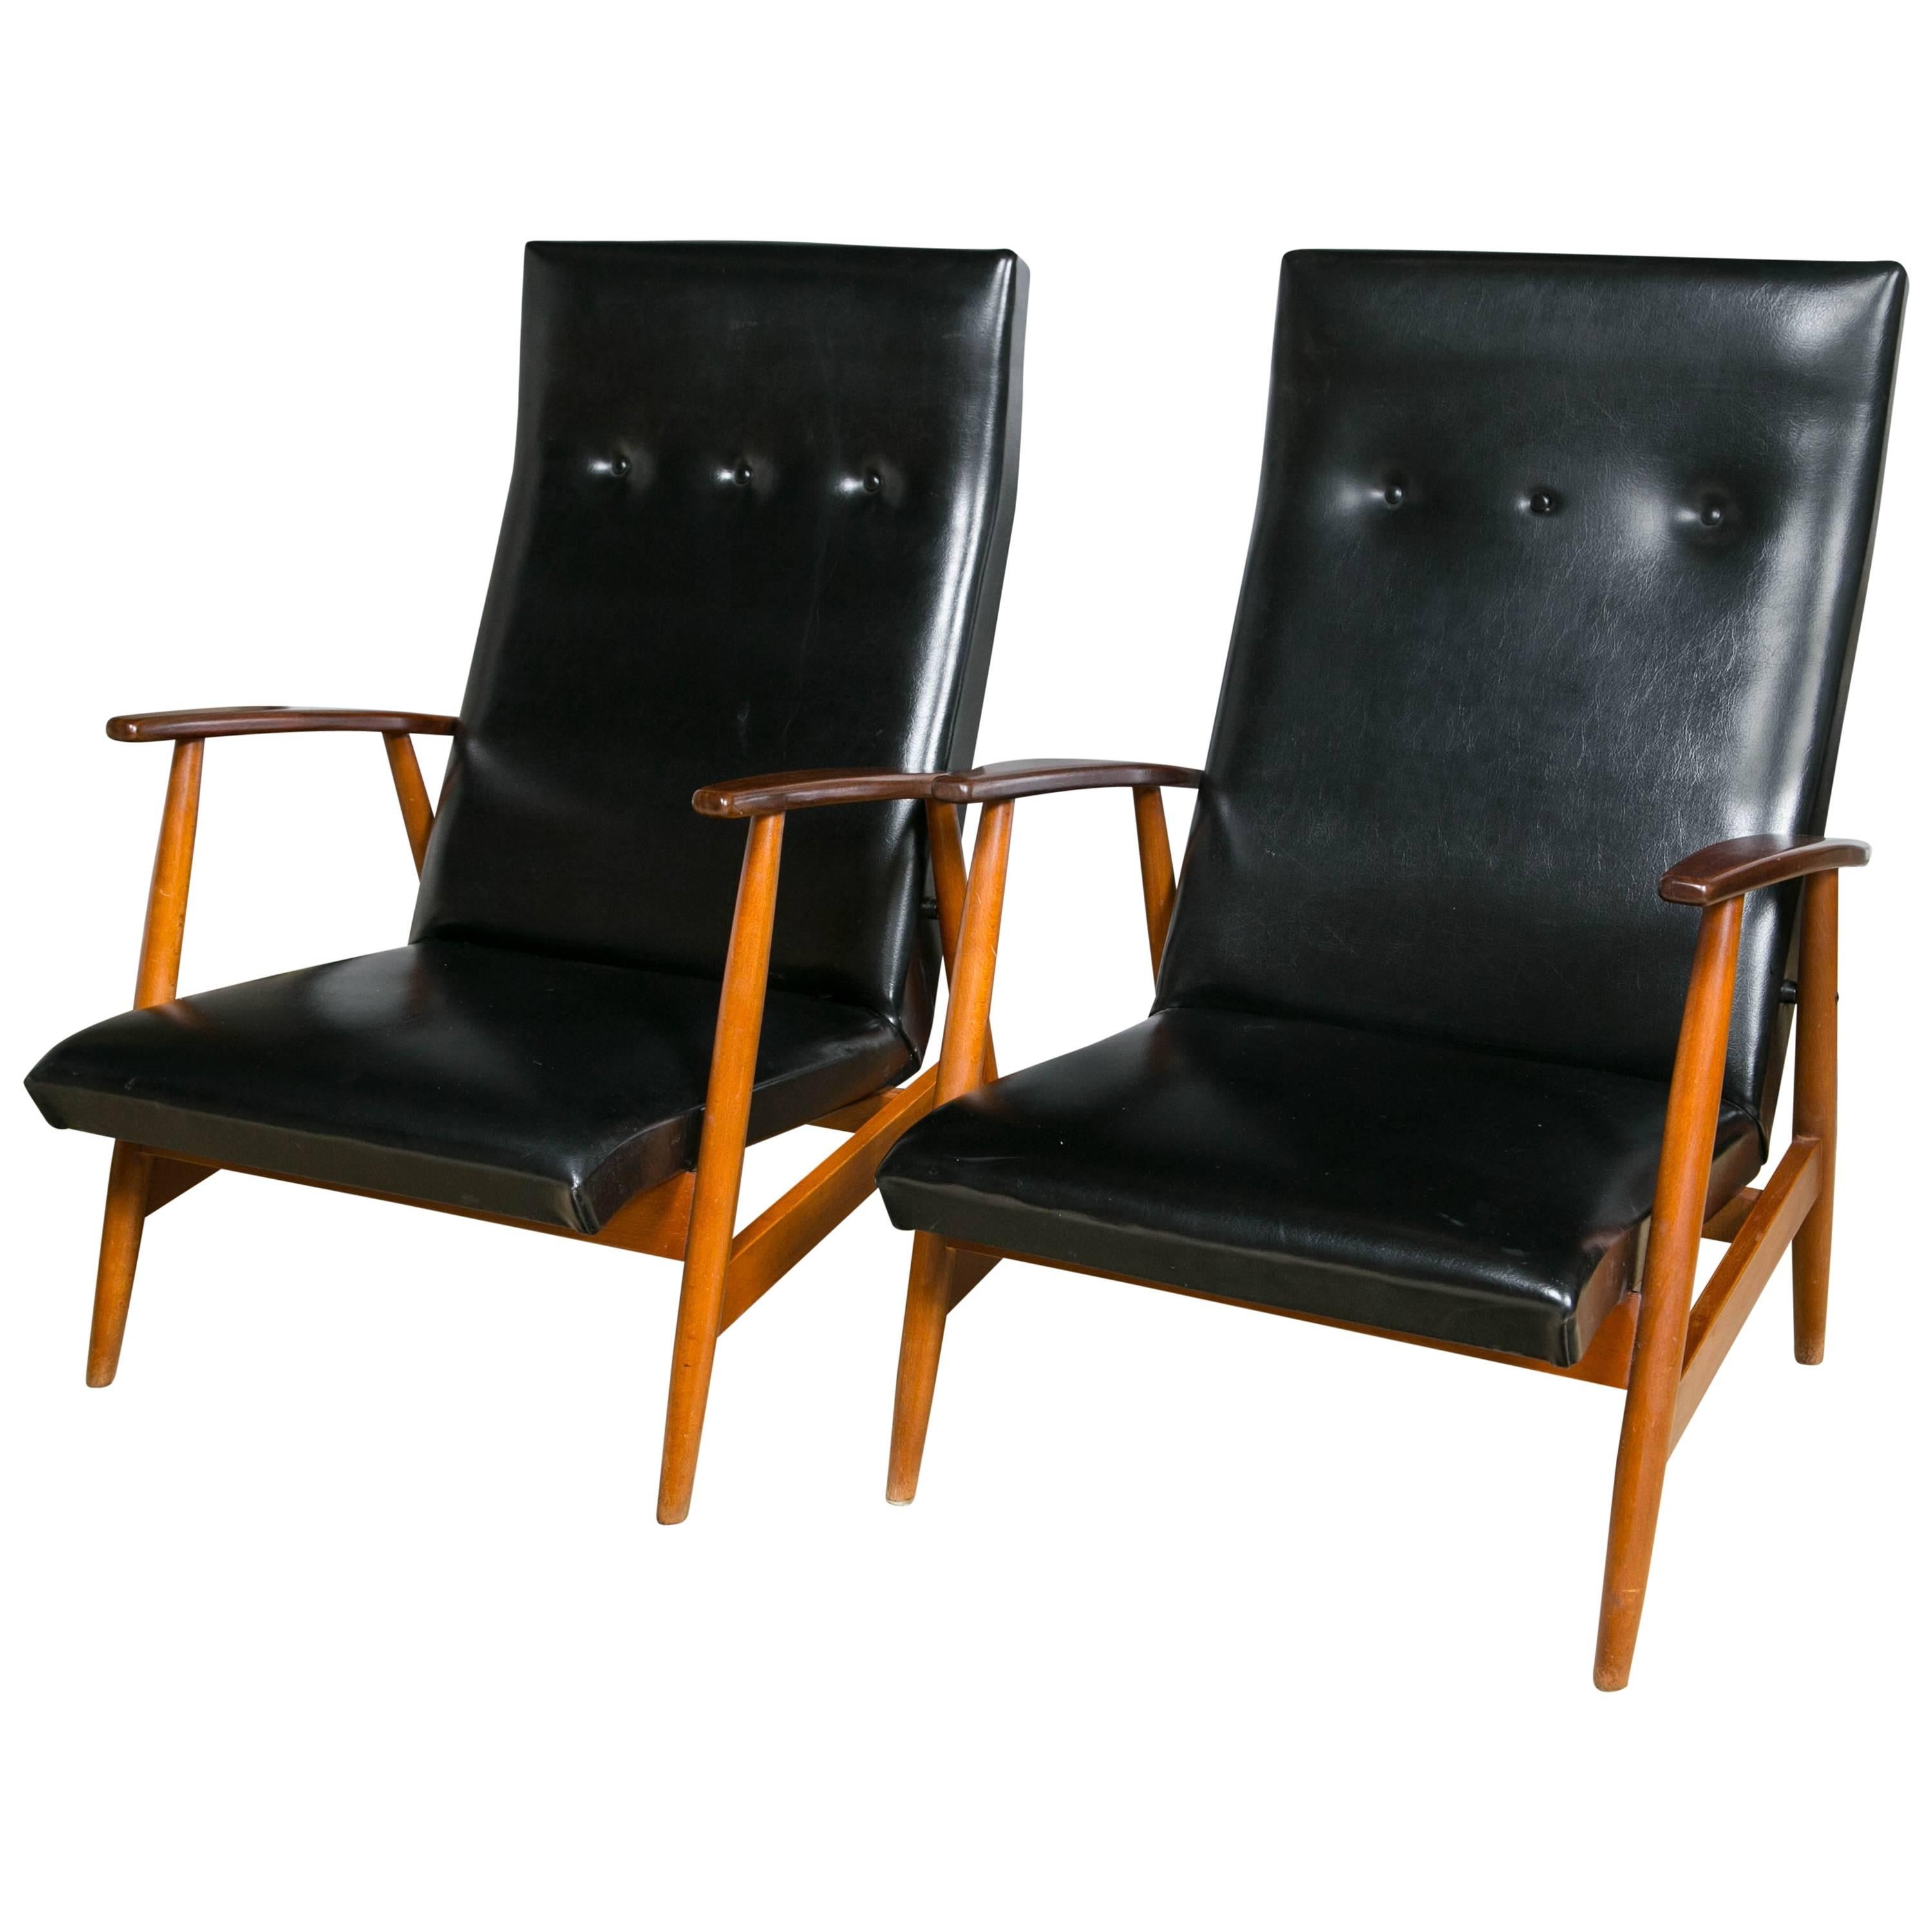 Pair of Mid Century Modern Scandinavian Teak and Black Lounge Chairs For Sale